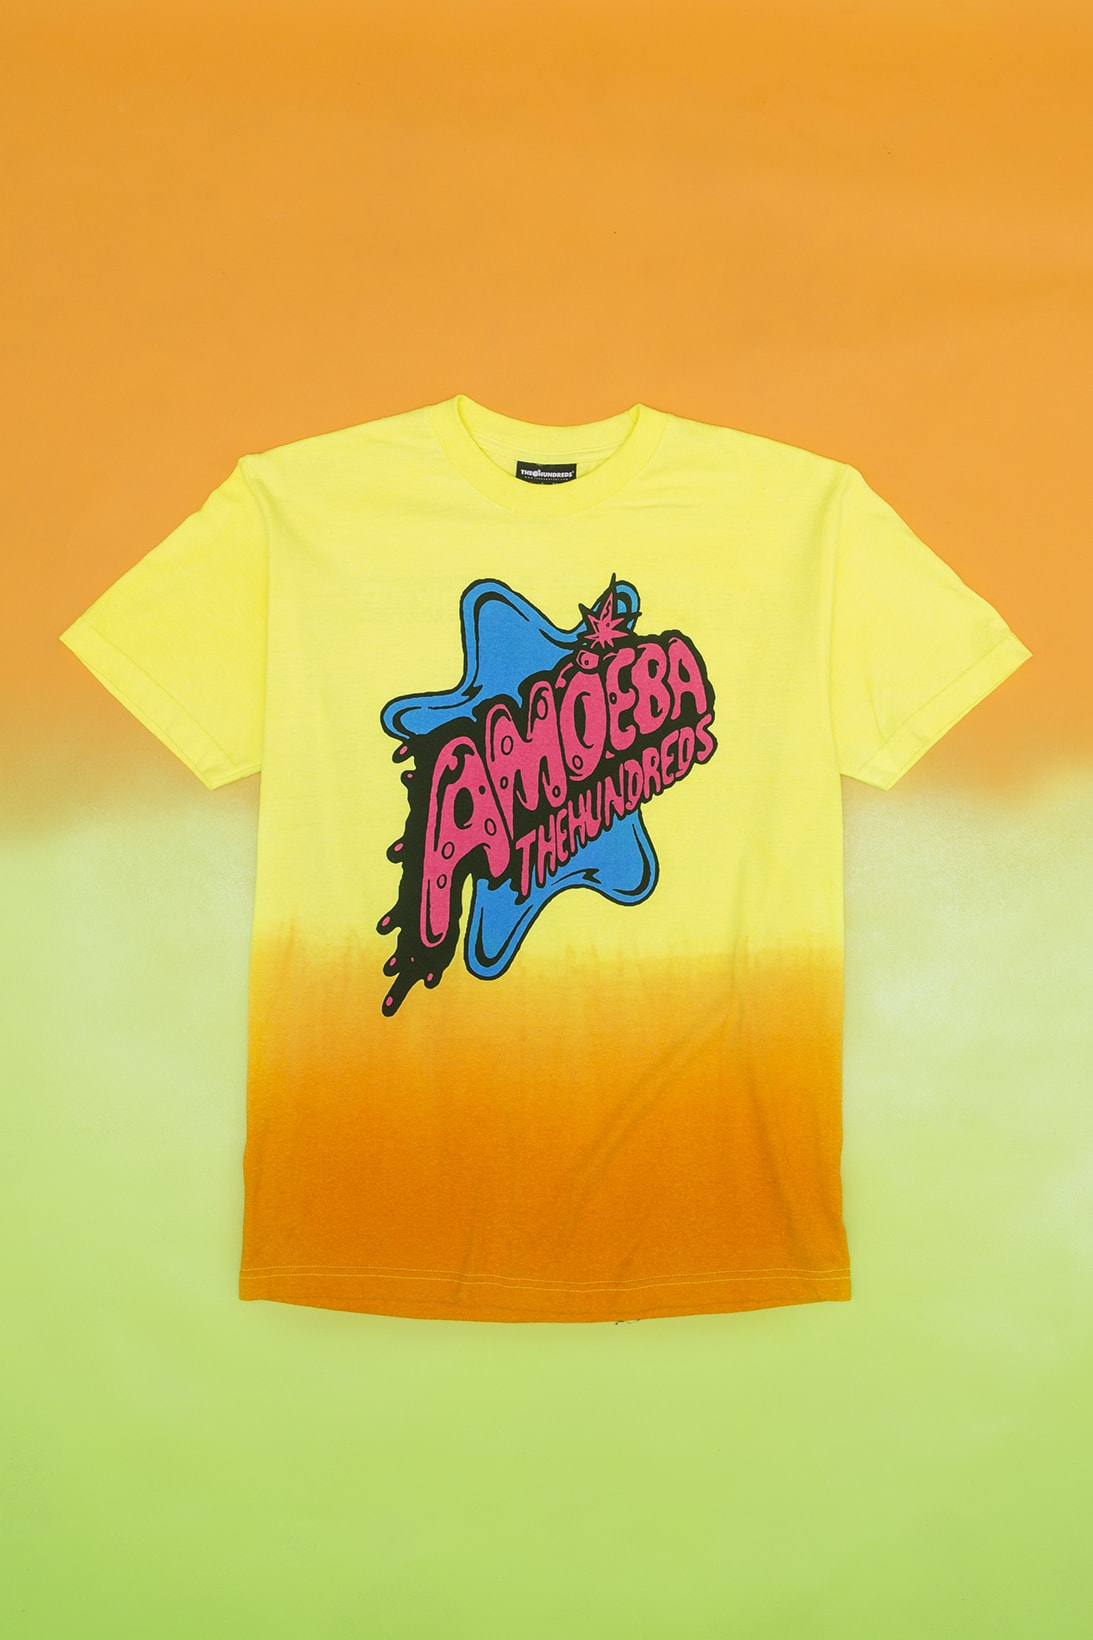 The Hundreds x Amoeba Music Collaboration release date info drop